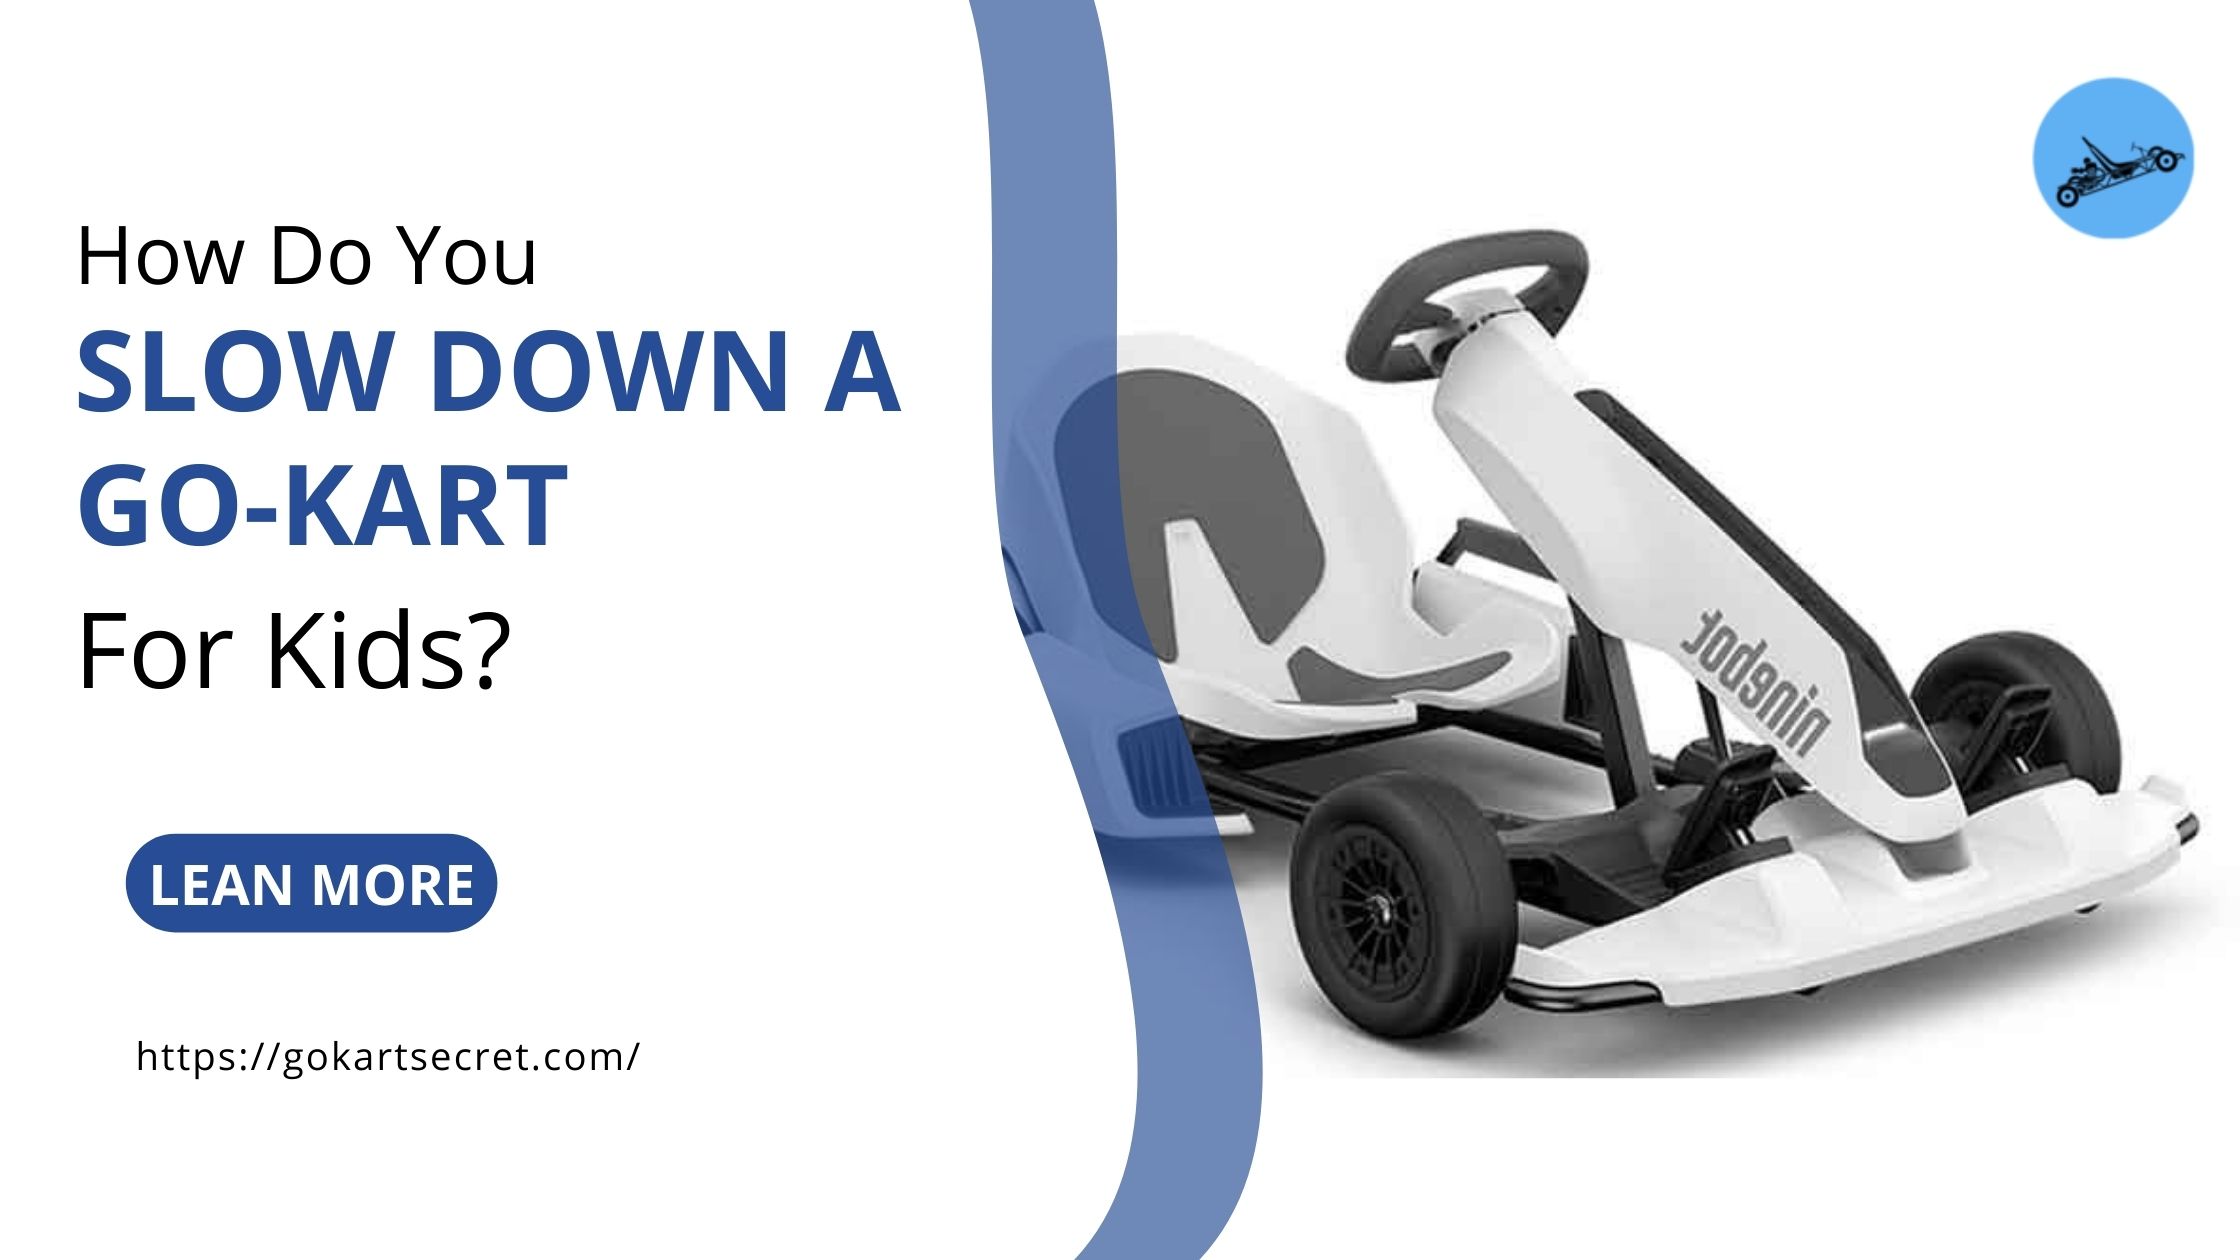 How Do You Slow Down A Go-Kart For Kids?